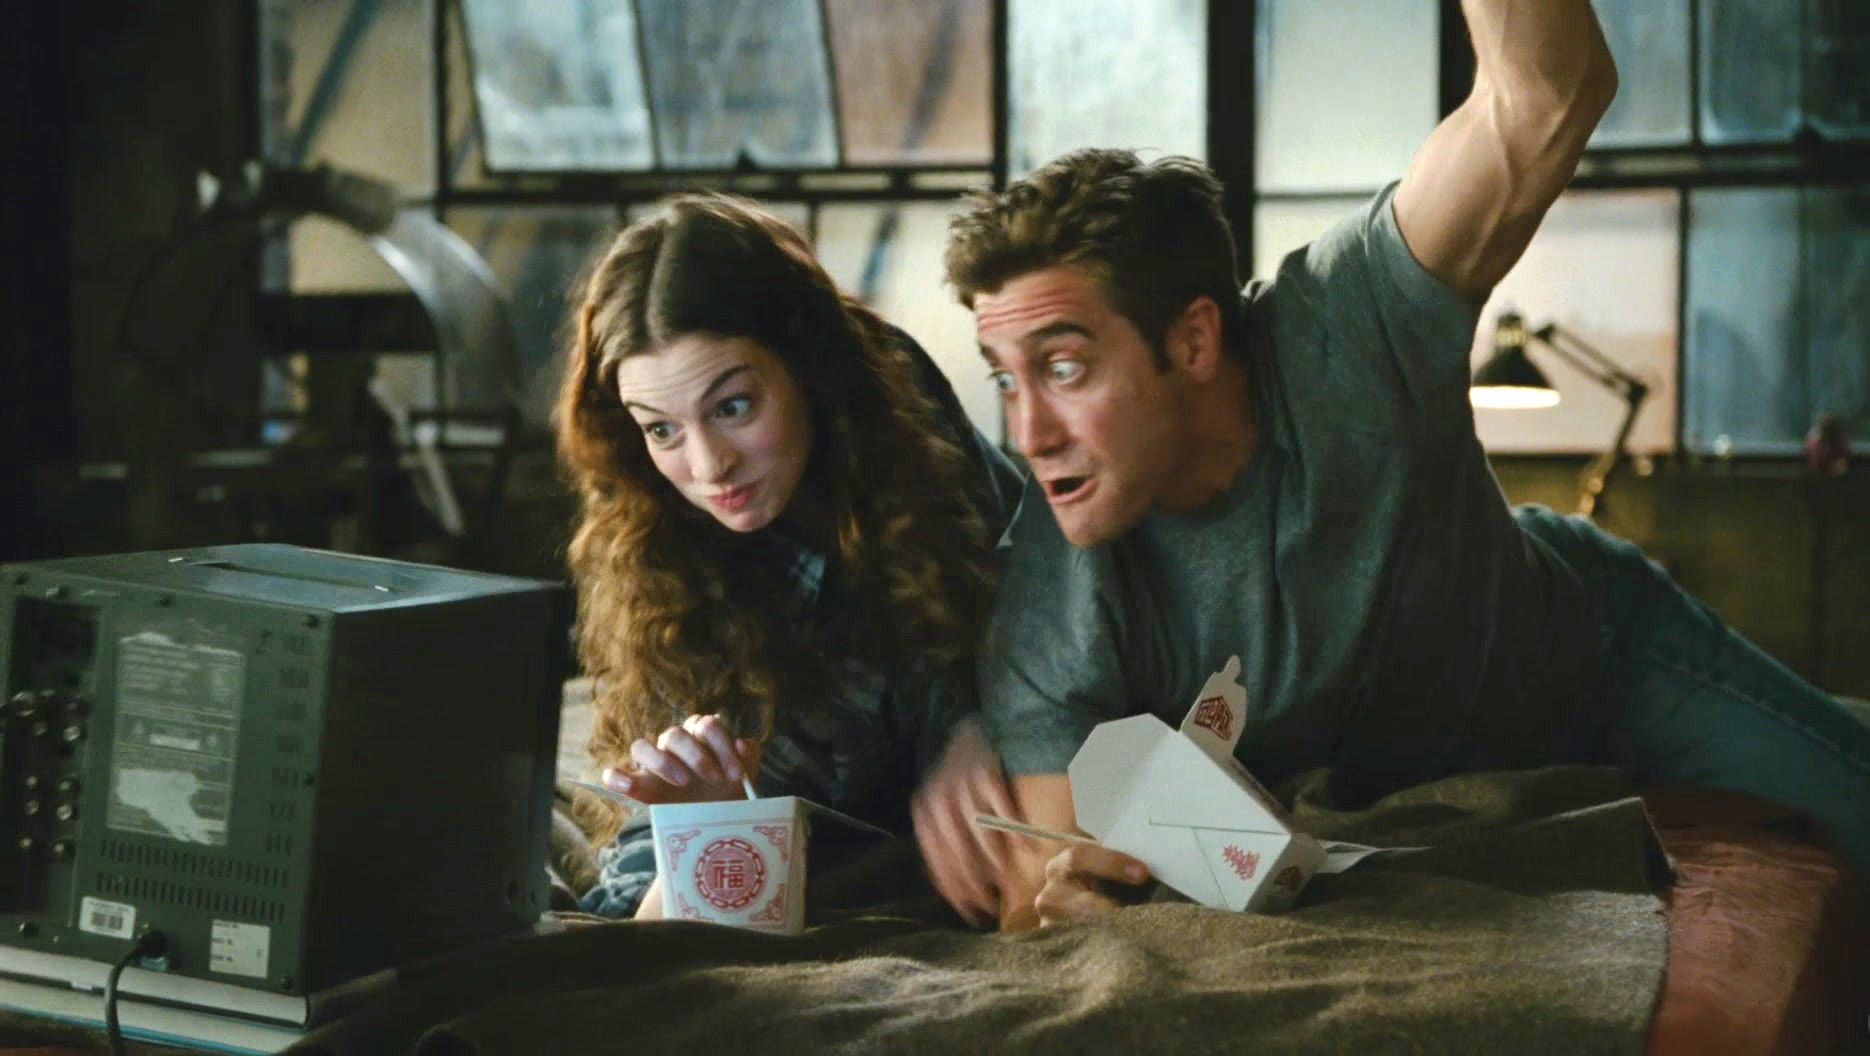 Love & Other Drugs. 